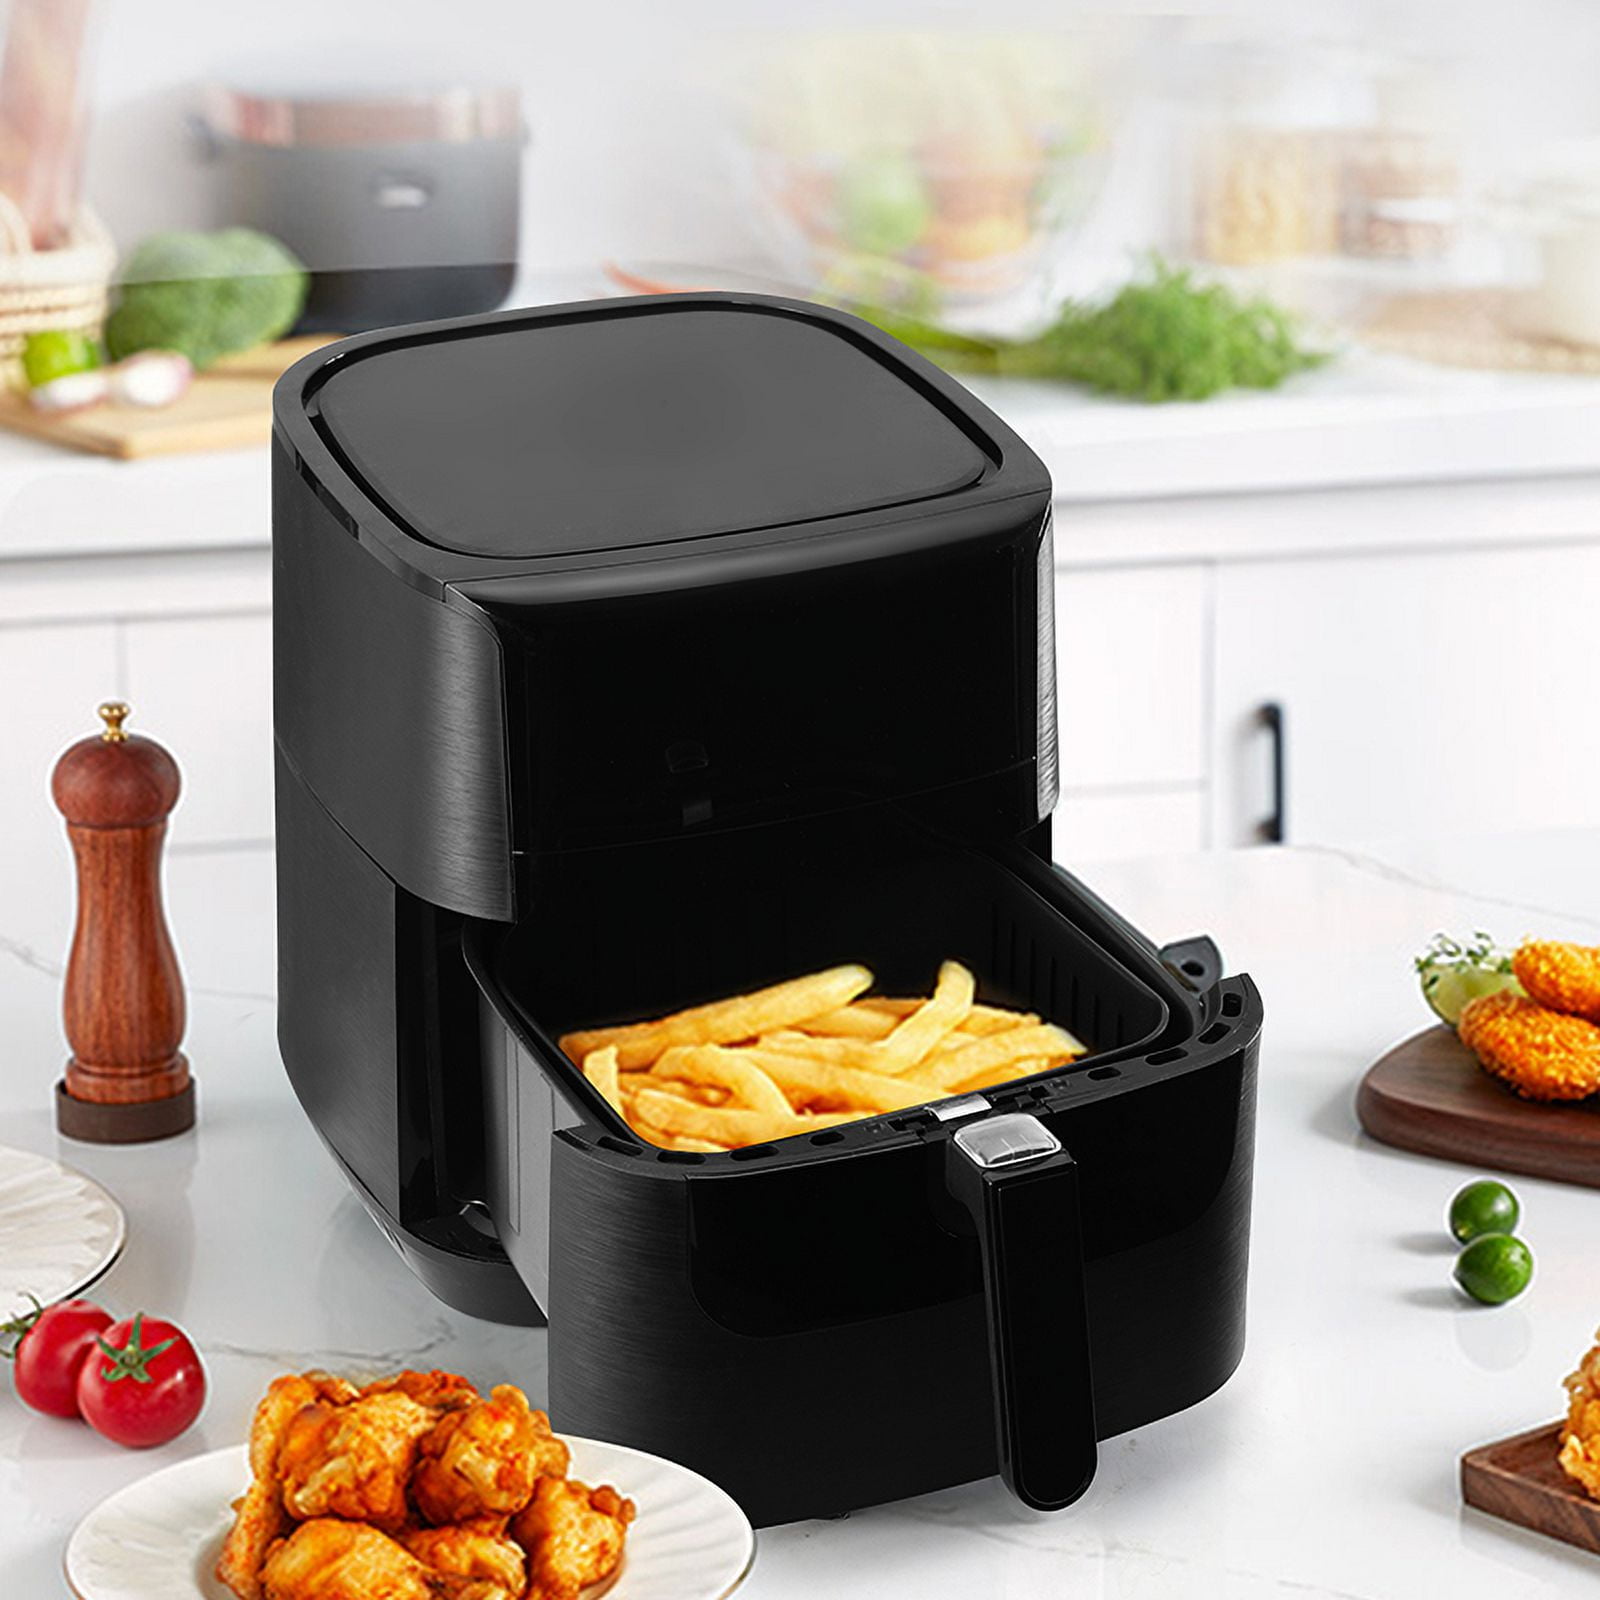 HAUSHOF Air Fryer, 4.2 Quart Compact Small Oven with 9 Cooking Functions, Nonstick Stainless Steel & Dishwasher-Safe, No-Oil Air Fry, Roast, Bake